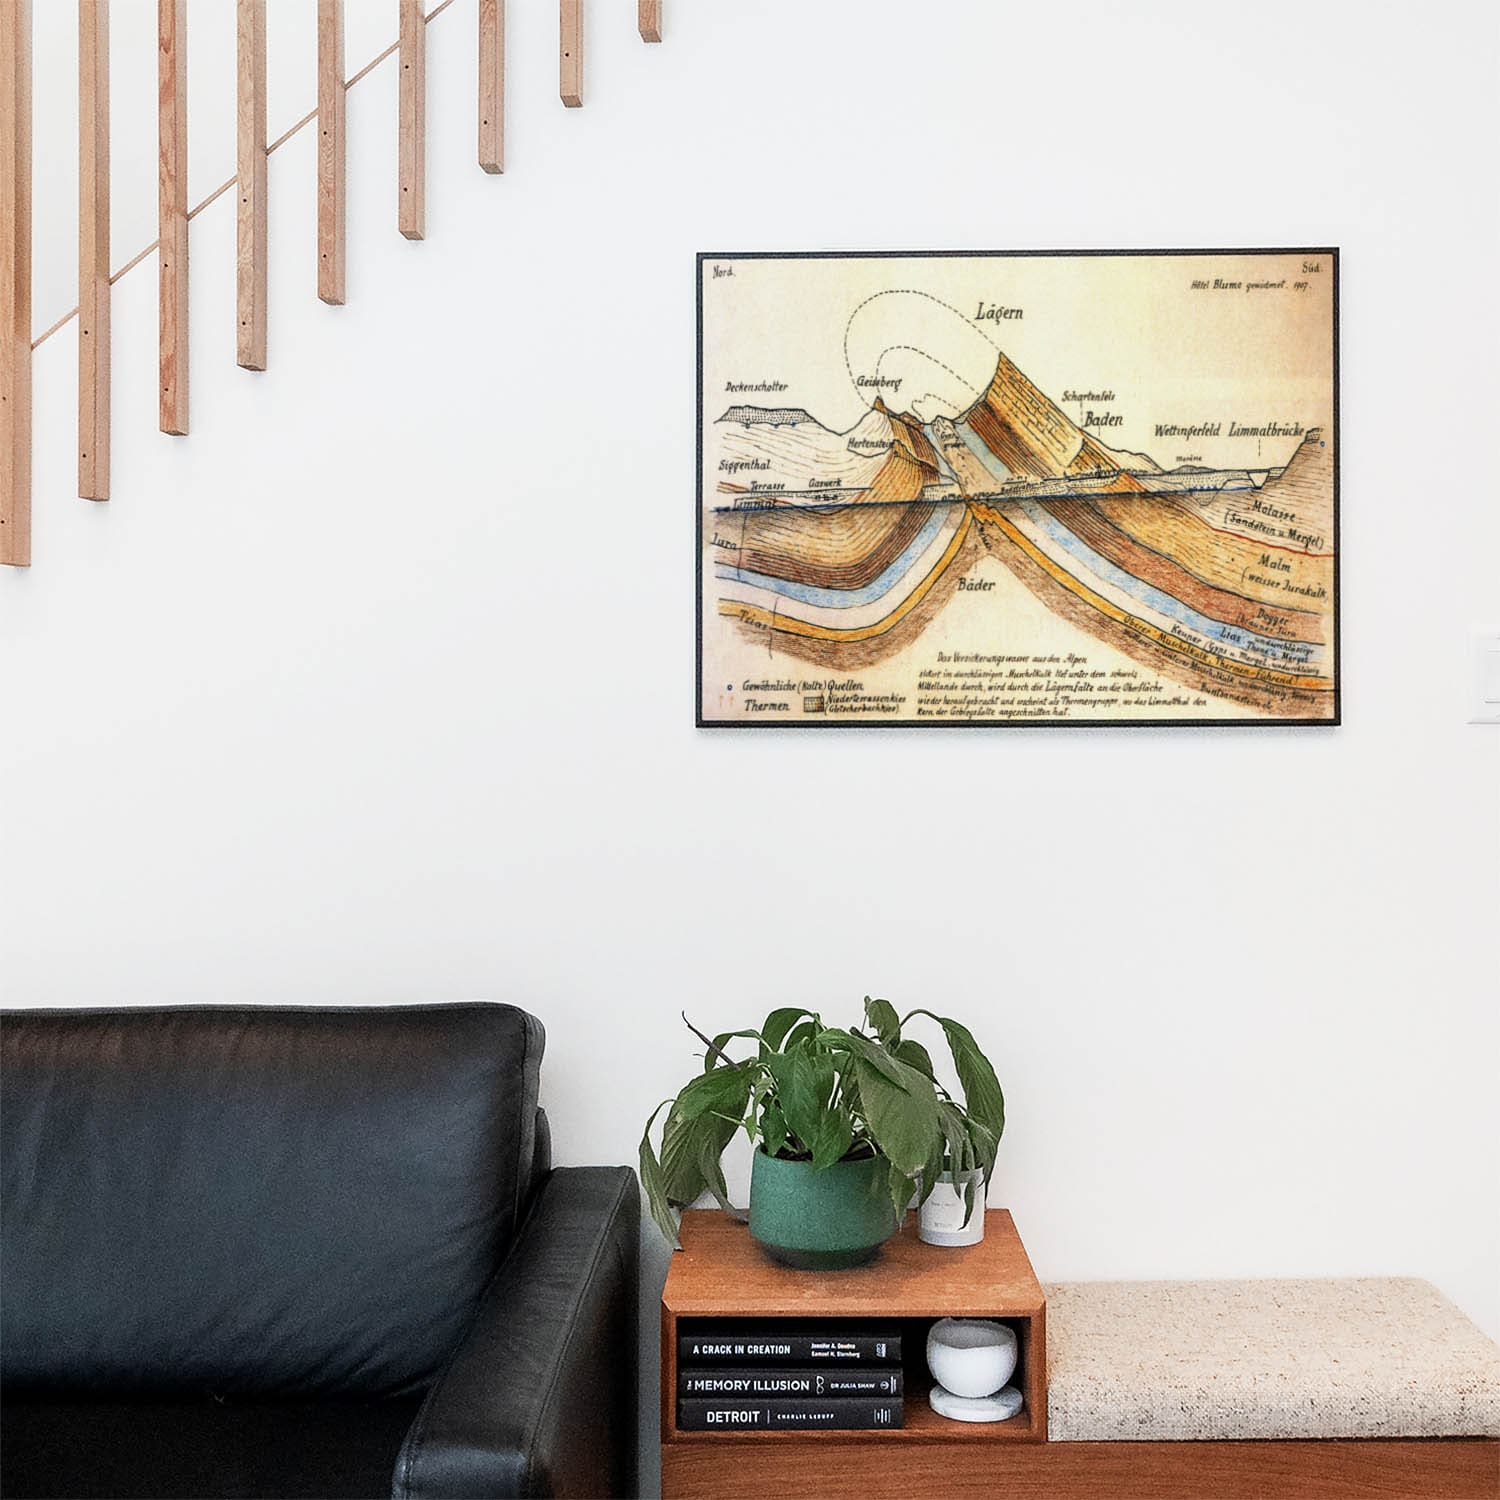 Vintage Scientific Wall Art Print in a Picture Frame on Living Room Wall